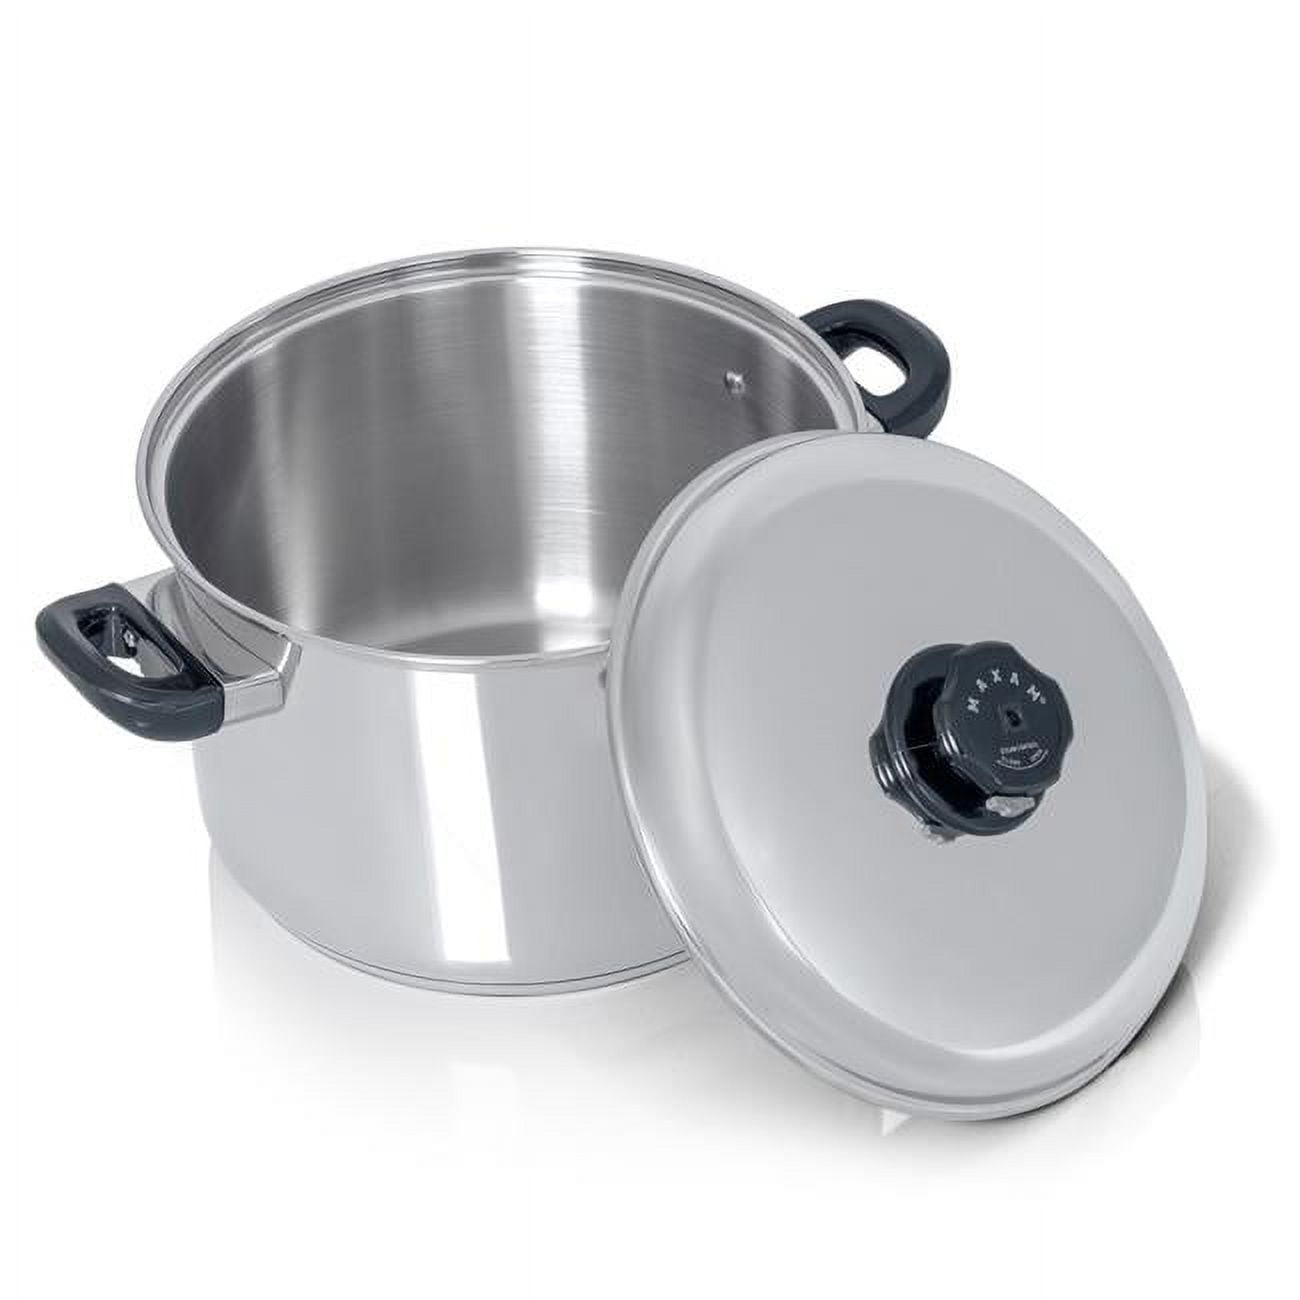 Picture of Maxam KTSP5MX 12 qt. 18-10 Stainless Steel Stock Pot for Waterless Cooking